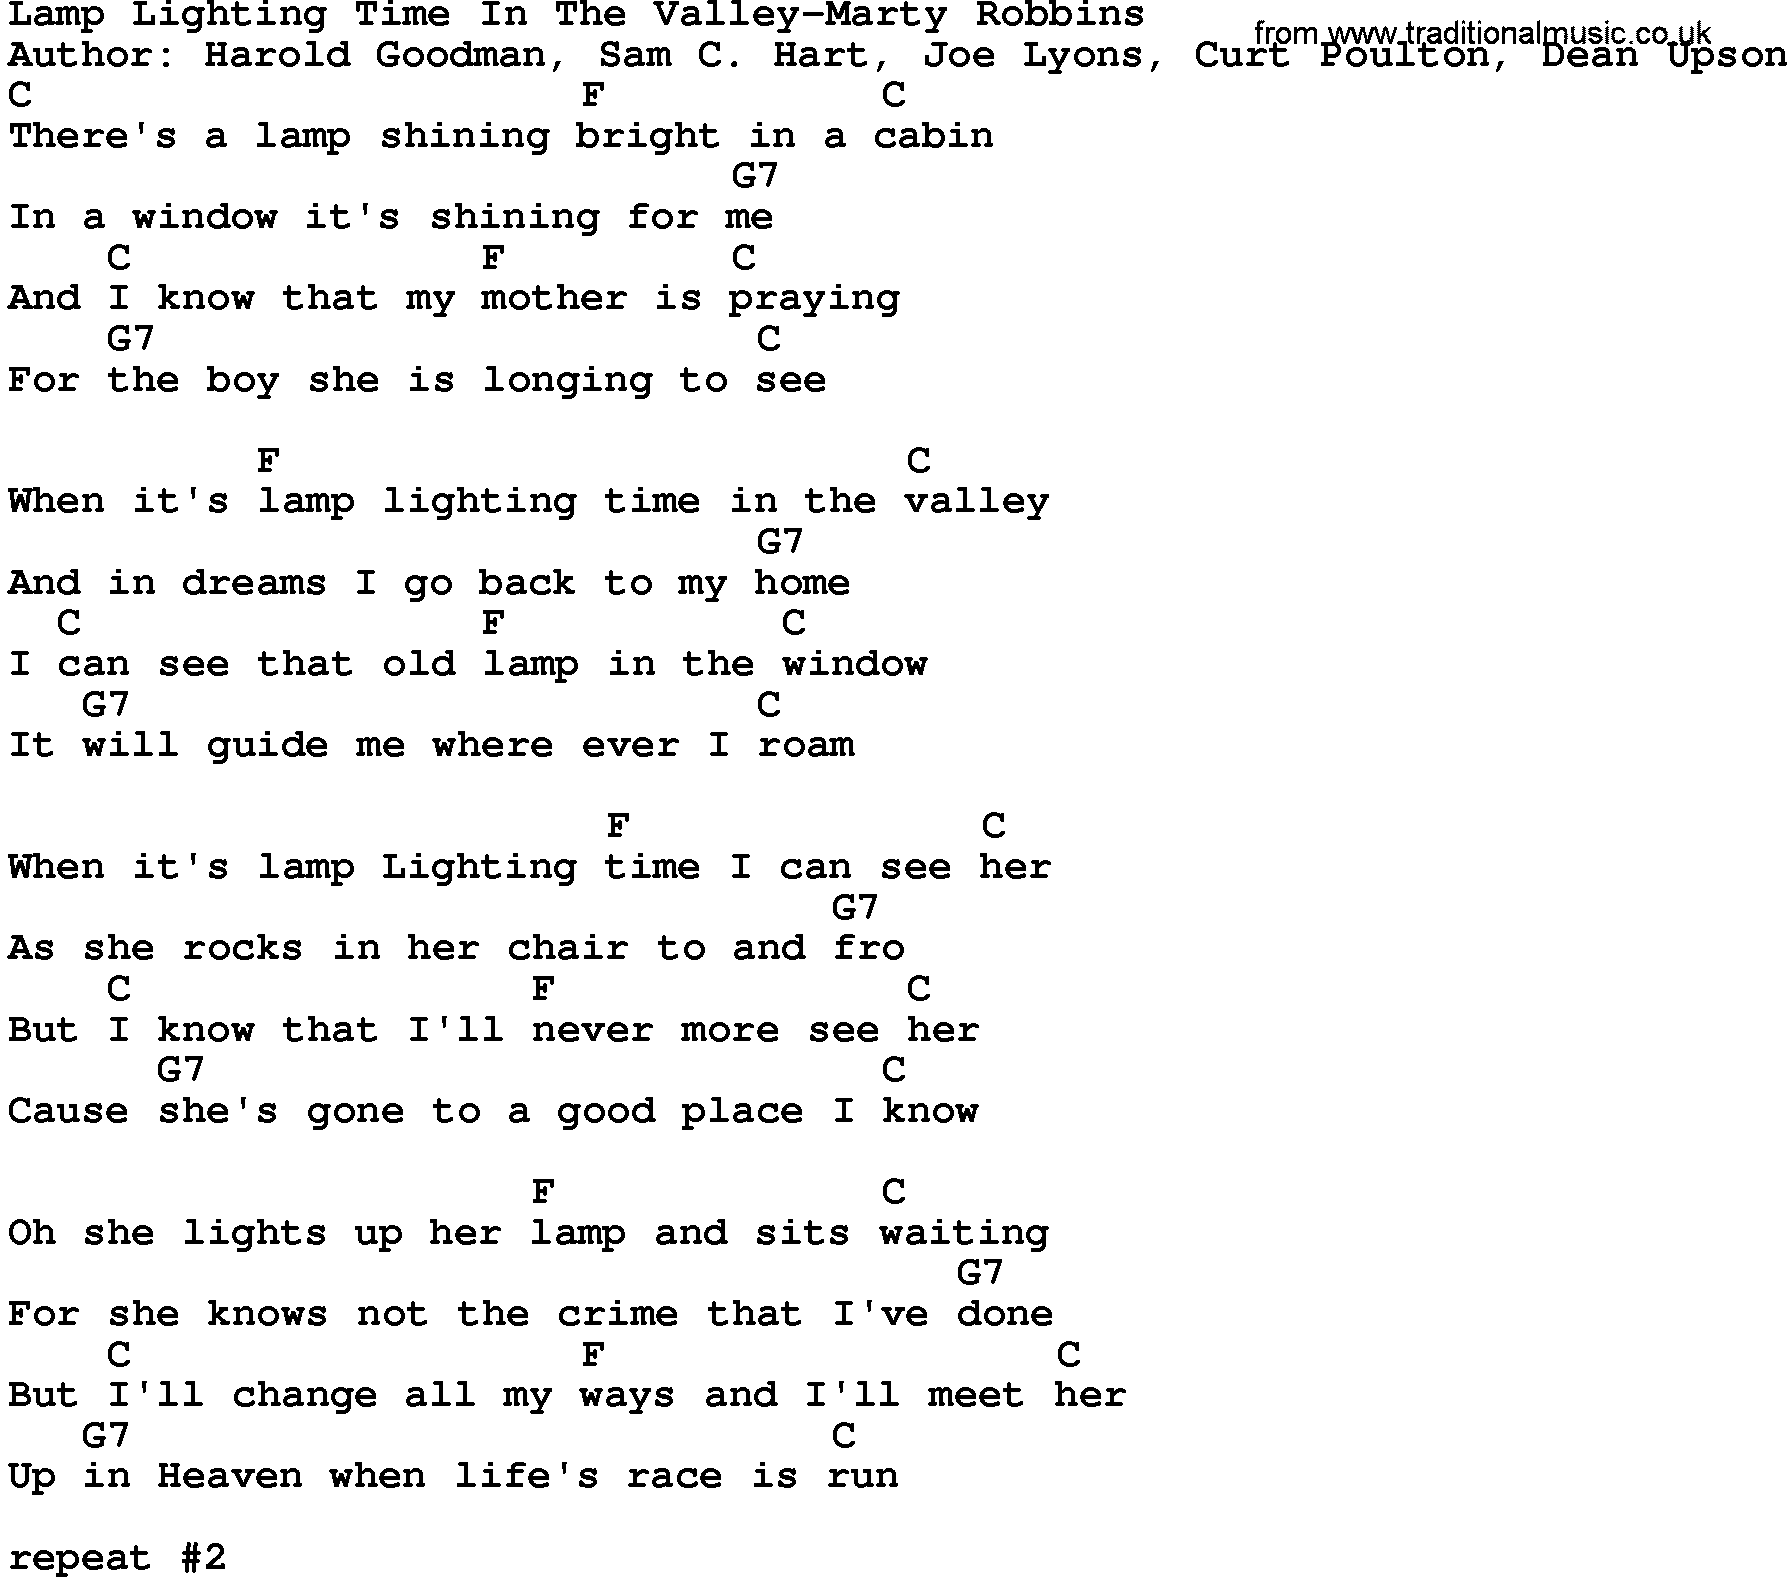 Country music song: Lamp Lighting Time In The Valley-Marty Robbins lyrics and chords